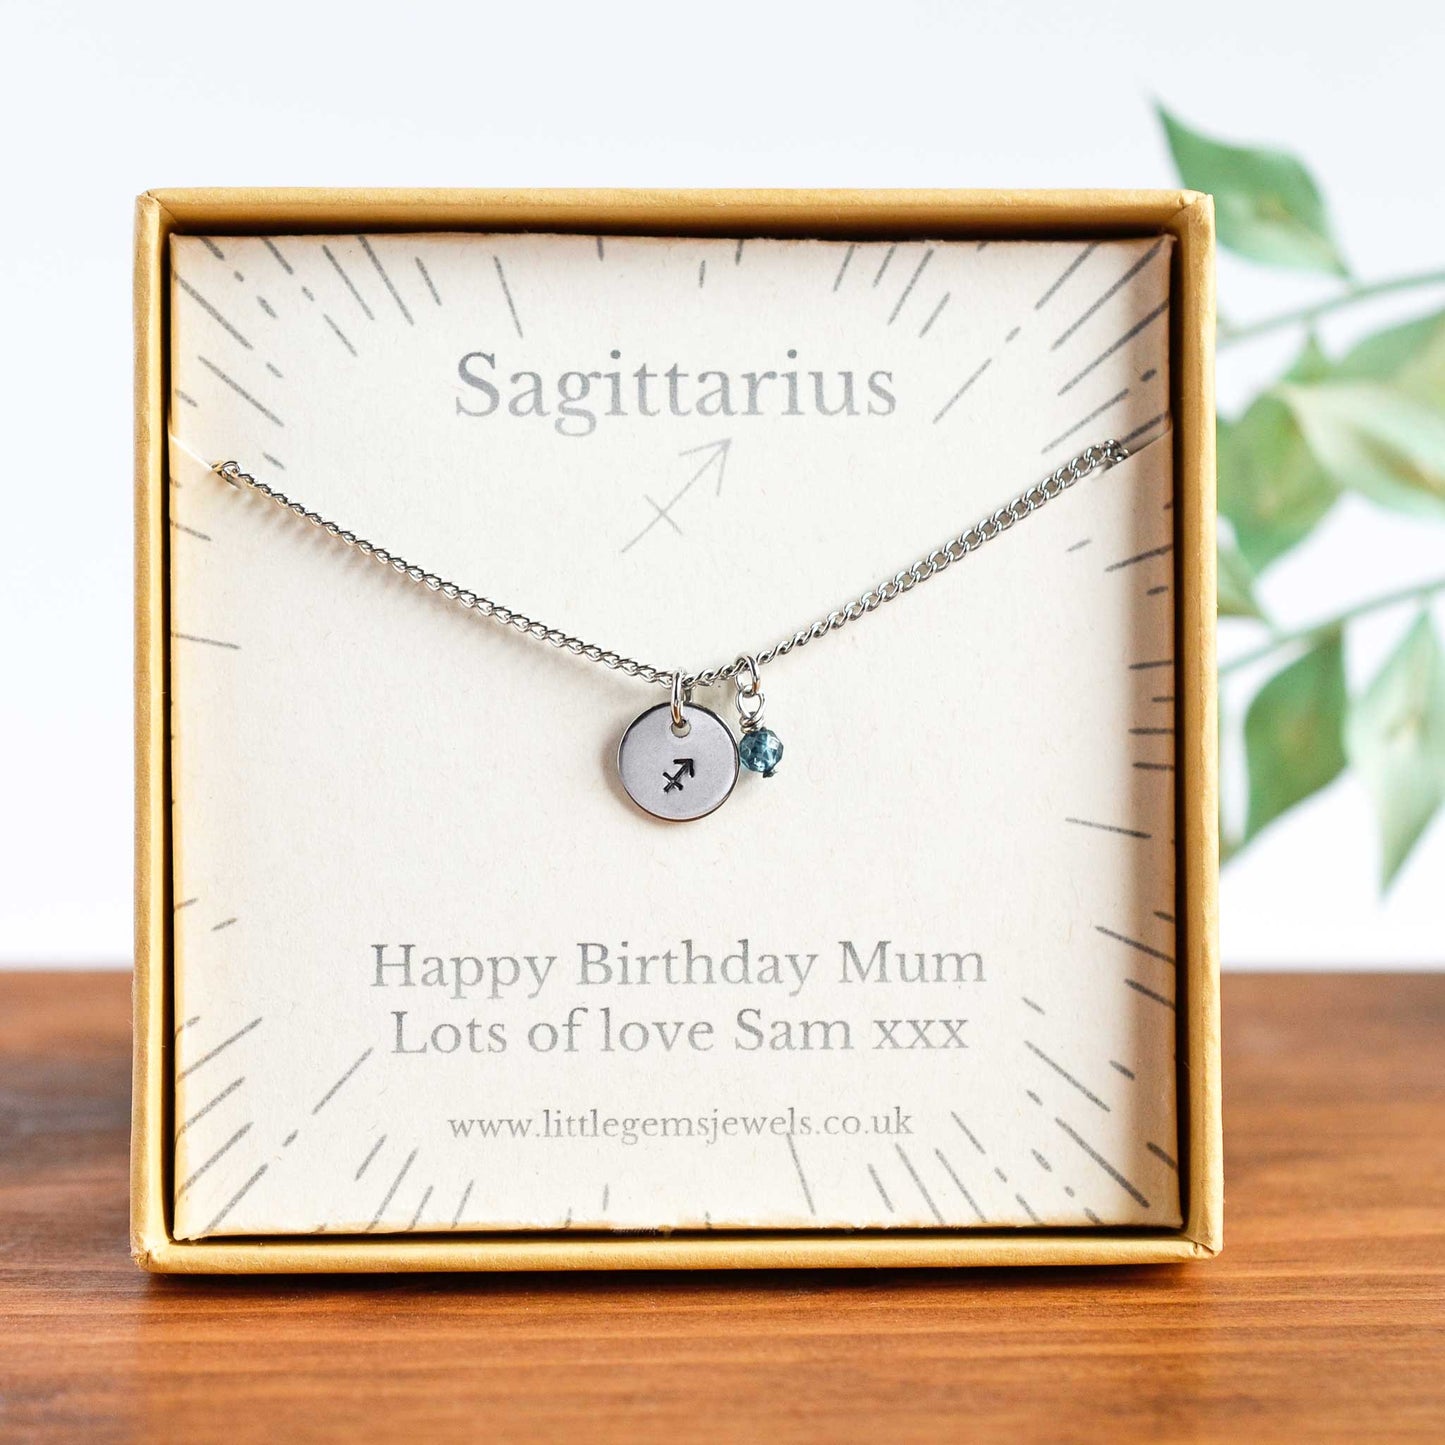 Sagittarius Zodiac necklace with personalised gift message in eco friendly gift box